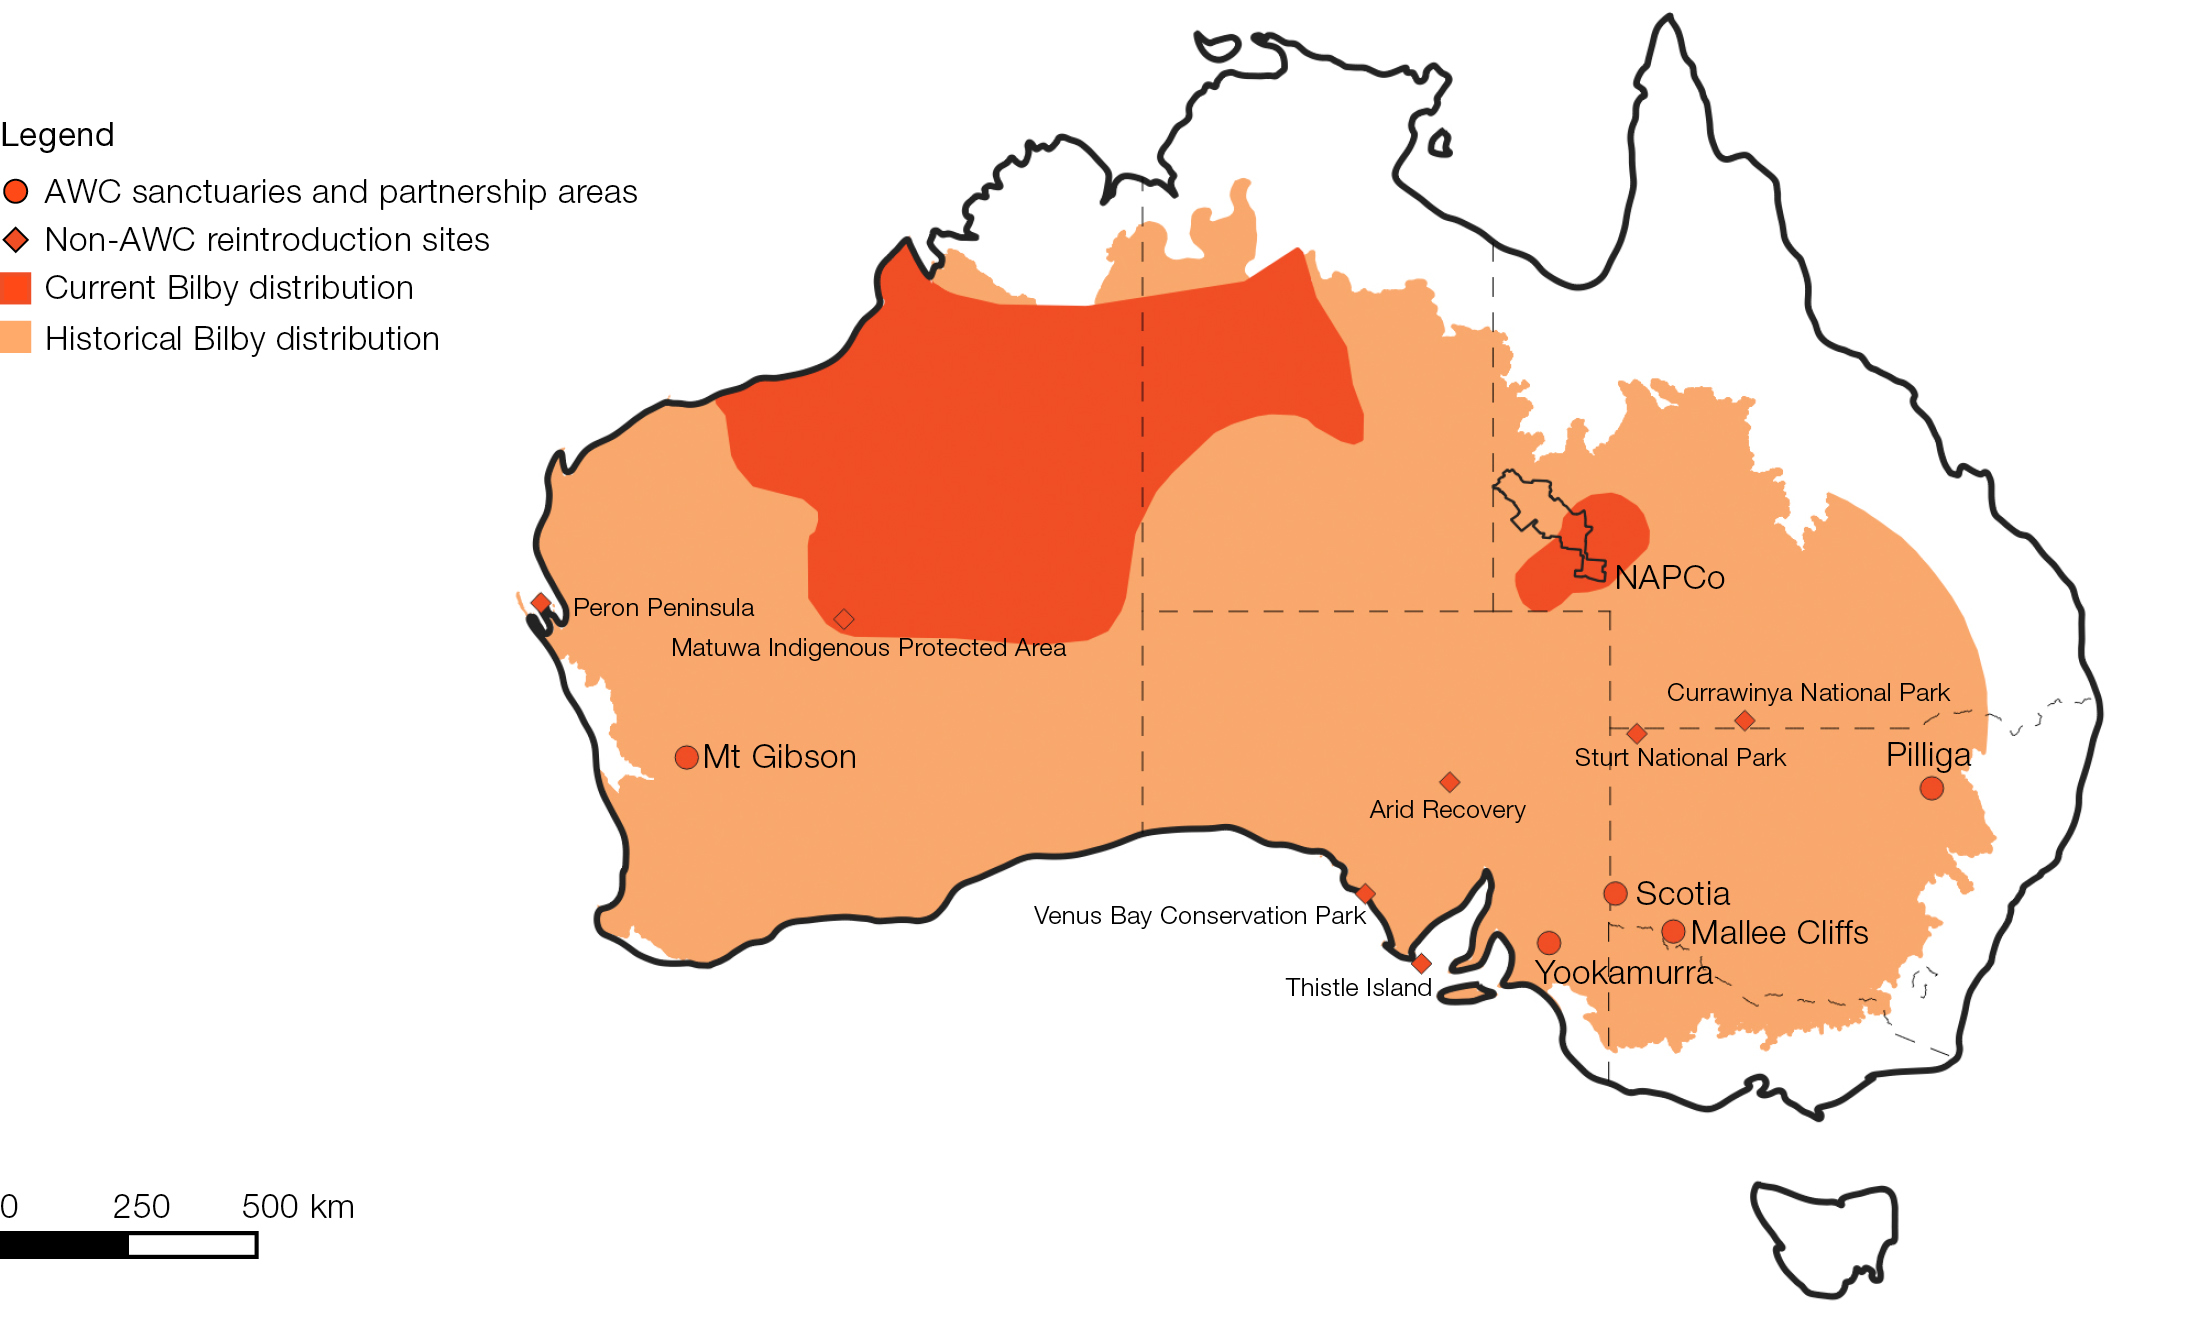 Historical and current Bilby distribution. AWC has established reintroduced Bilby populations at five sanctuaries and partnership areas within the marsupial’s former range. Historical distribution based on Southgate (1990) and Woinarski et al (2014) and current distribution based on Southgate (1990), Woinarski et al (2014) and Commonwealth Government (2022).